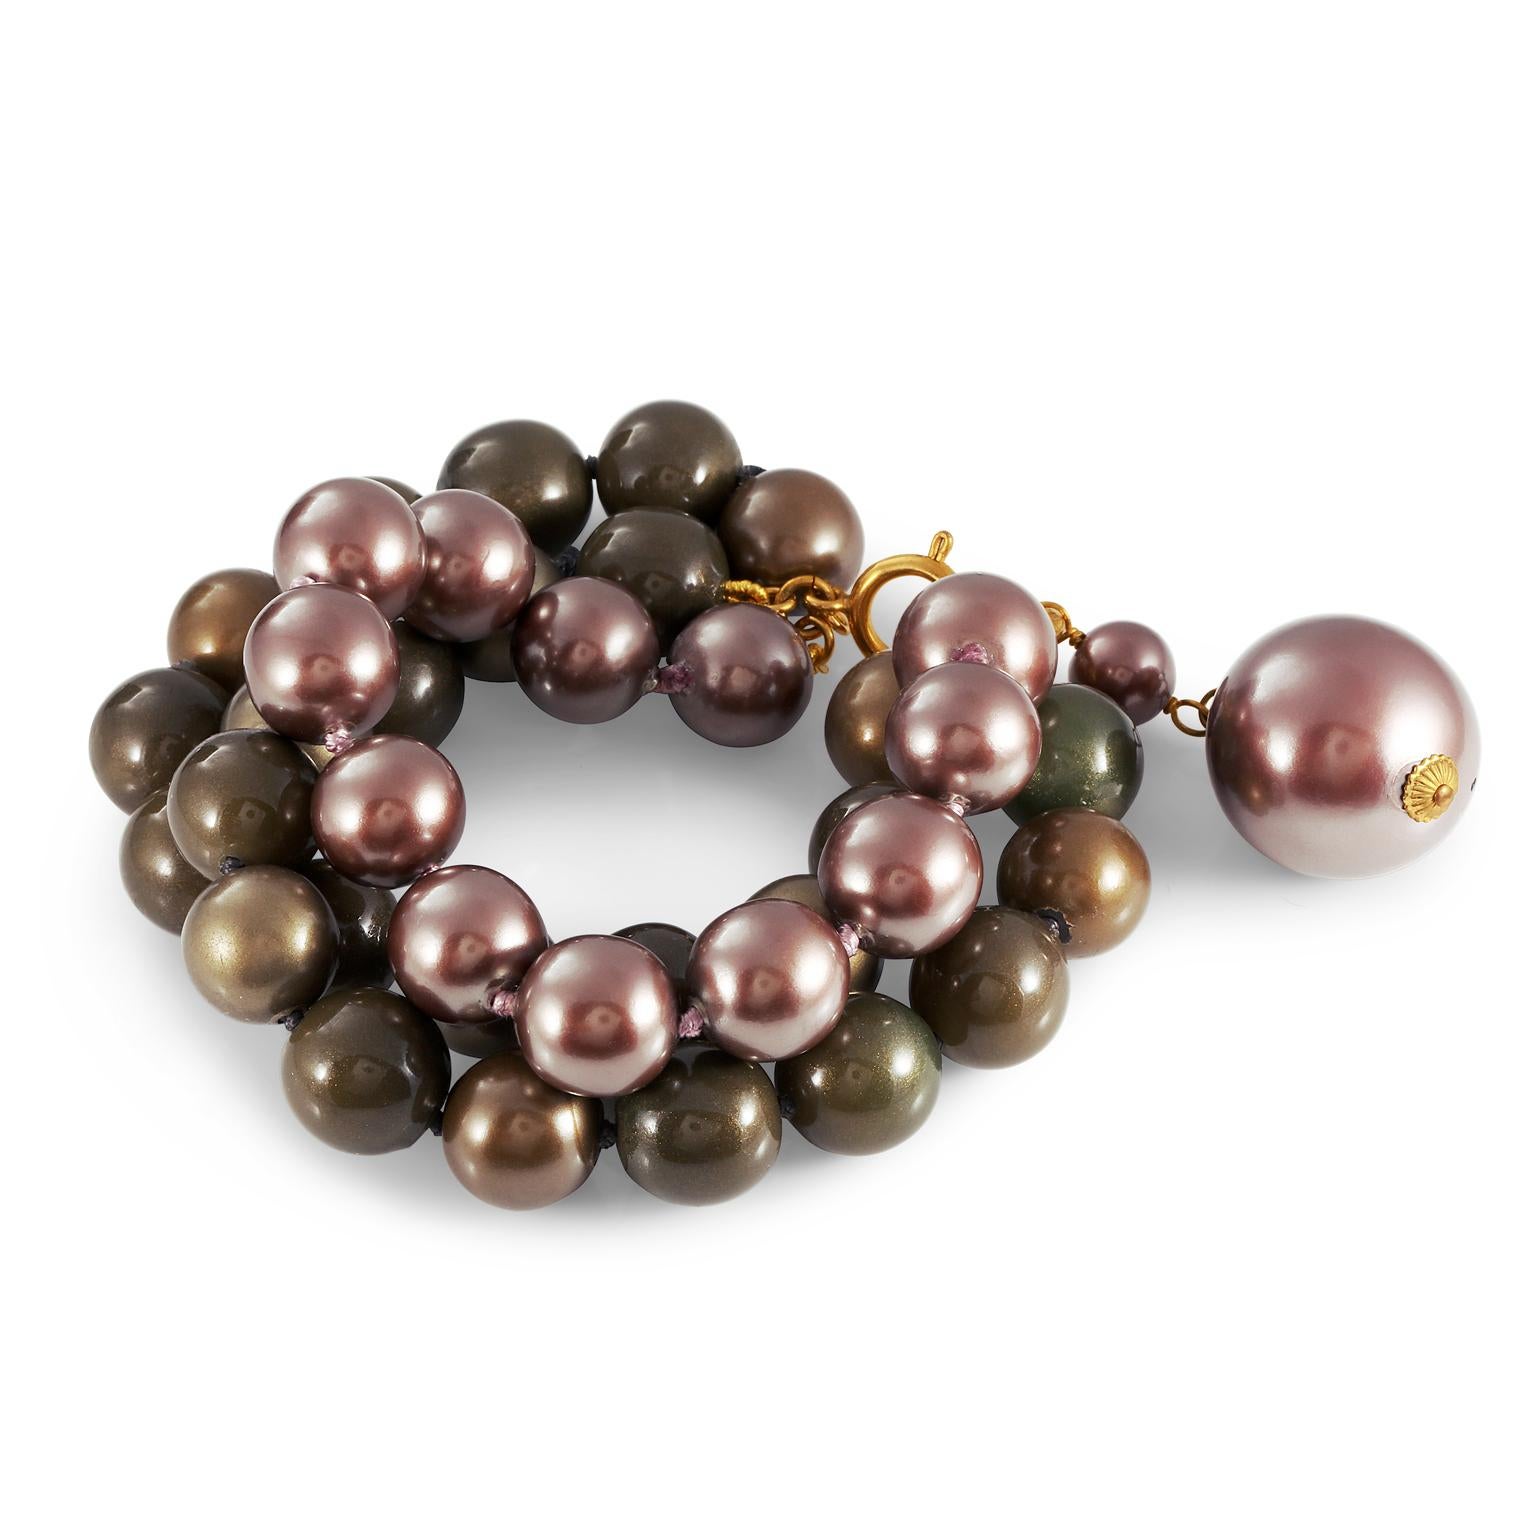 This authentic Chanel Tri Color Triple Row Bracelet is in excellent condition from the early 1990’s.  Three rows of beads create a beautiful statement piece.  Subtle metallic hues of burgundy, dark chocolate and dark gold. Spring hinge clasp with